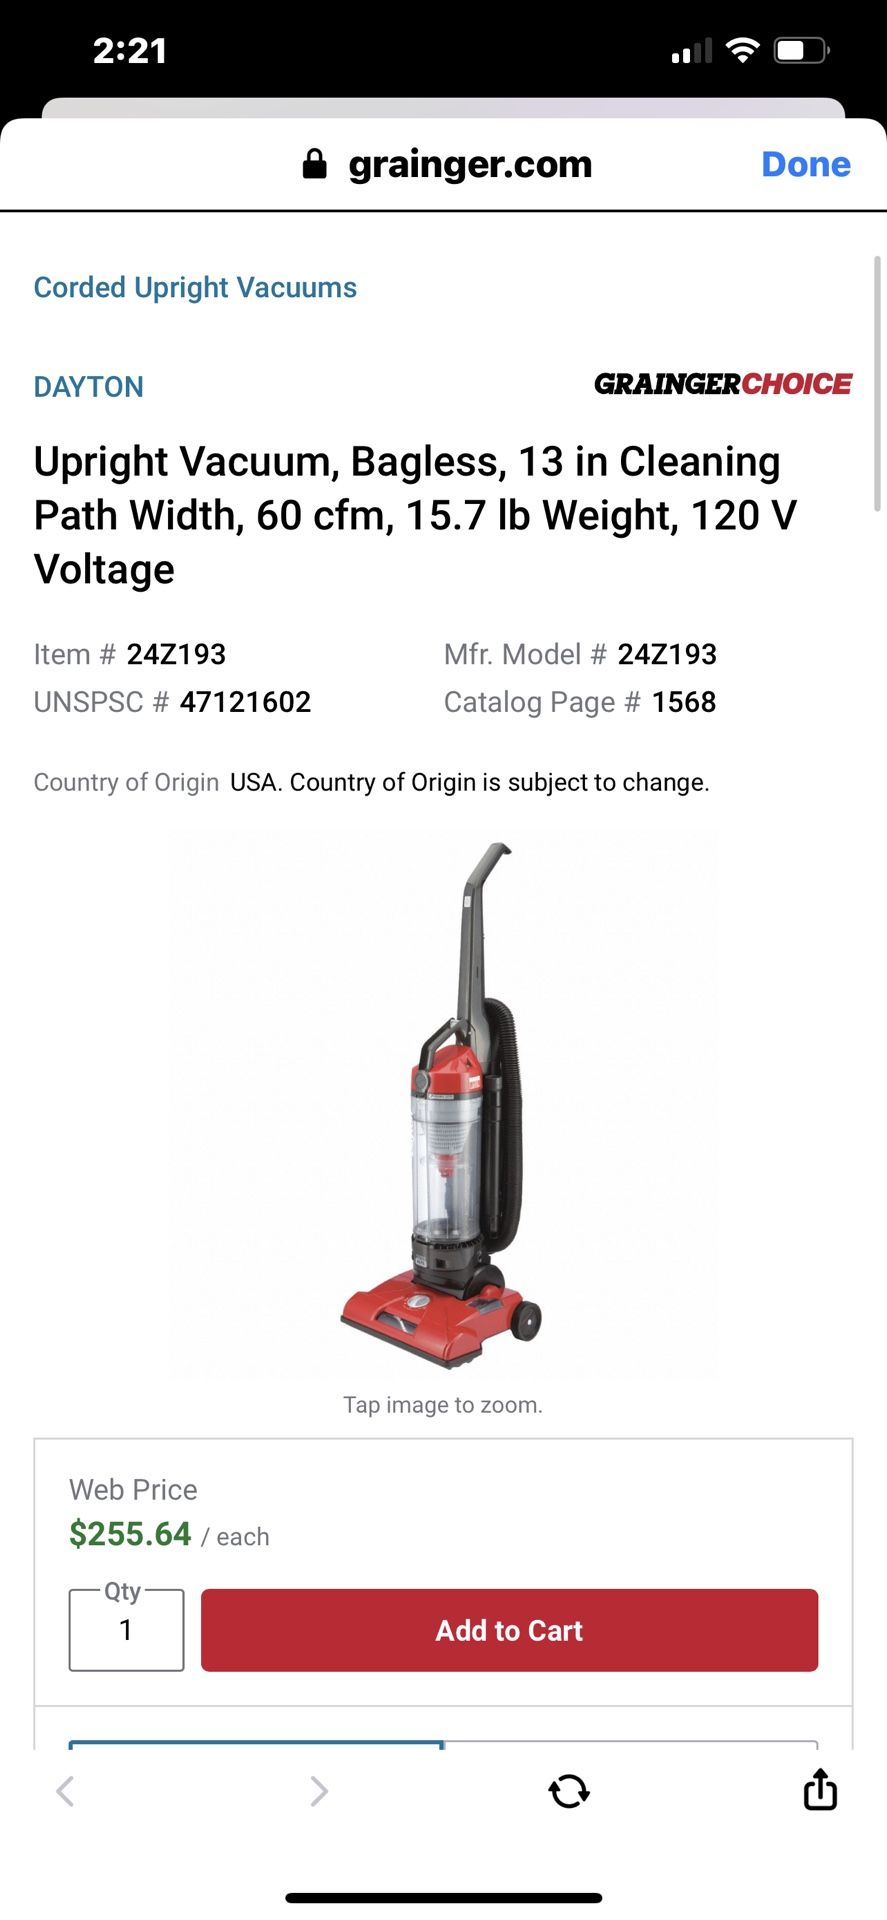 Upright Vacuum, Bagless, 13 in Cleaning Path Width, 60 cfm, 15.7 lb Weight, 120 V Voltage